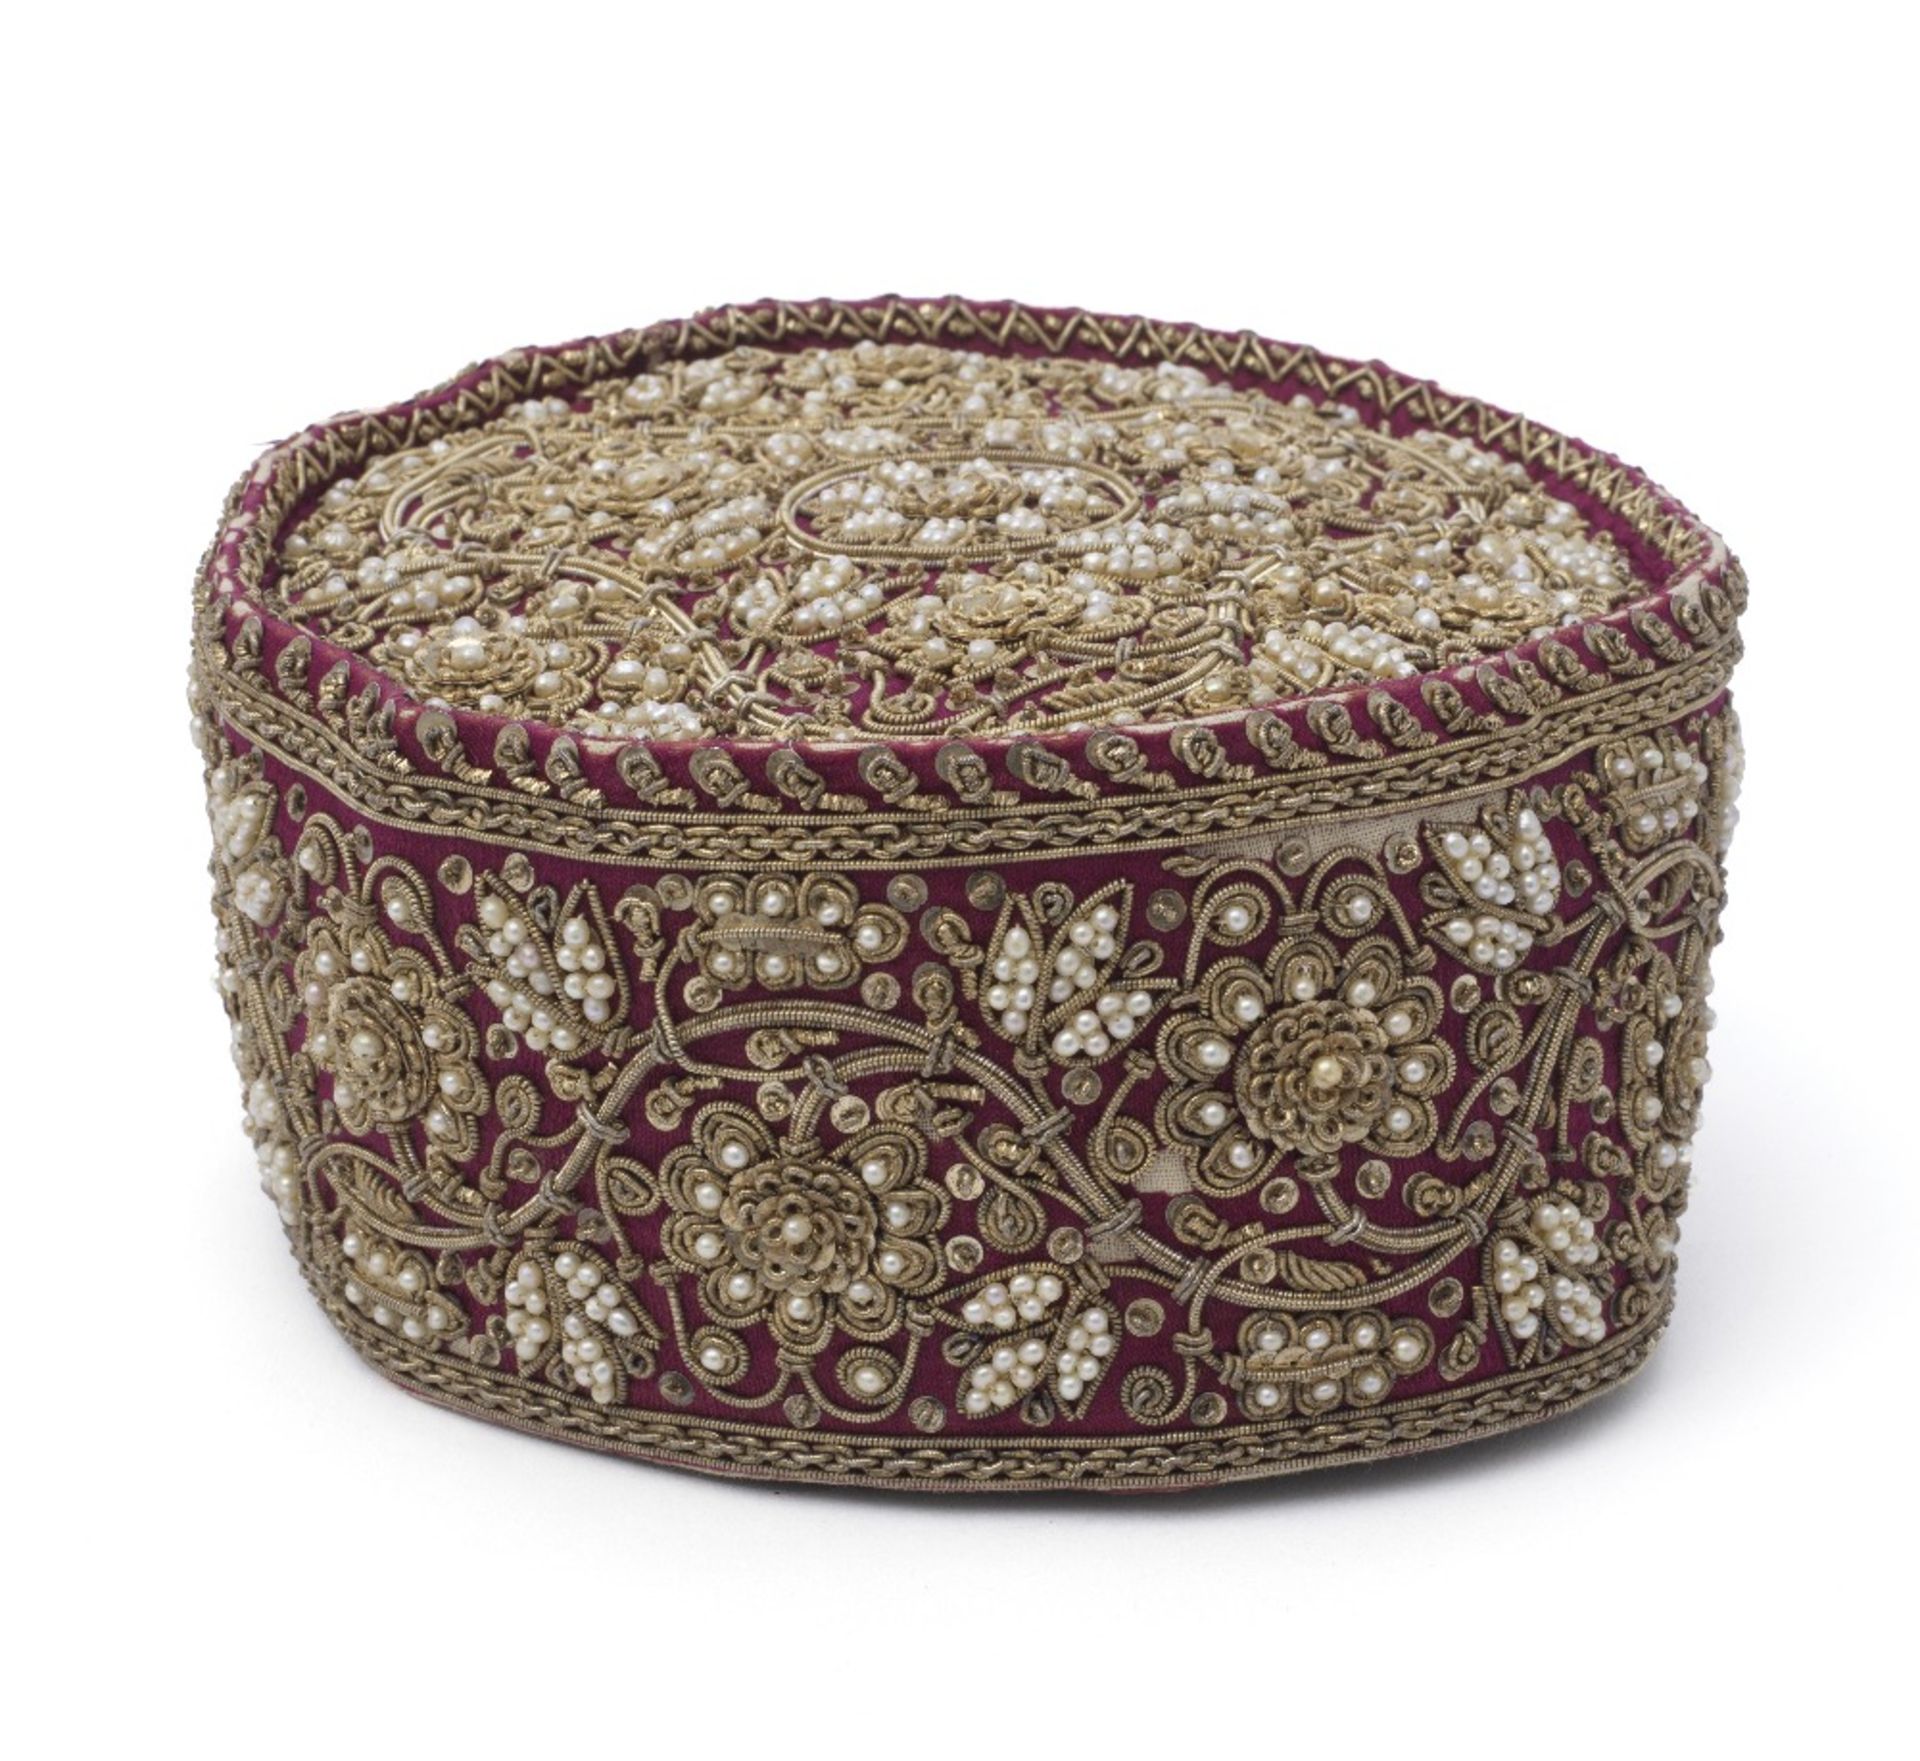 An Indian metal thread and pearl-embroidered prayer cap (topi) North India, 19th Century